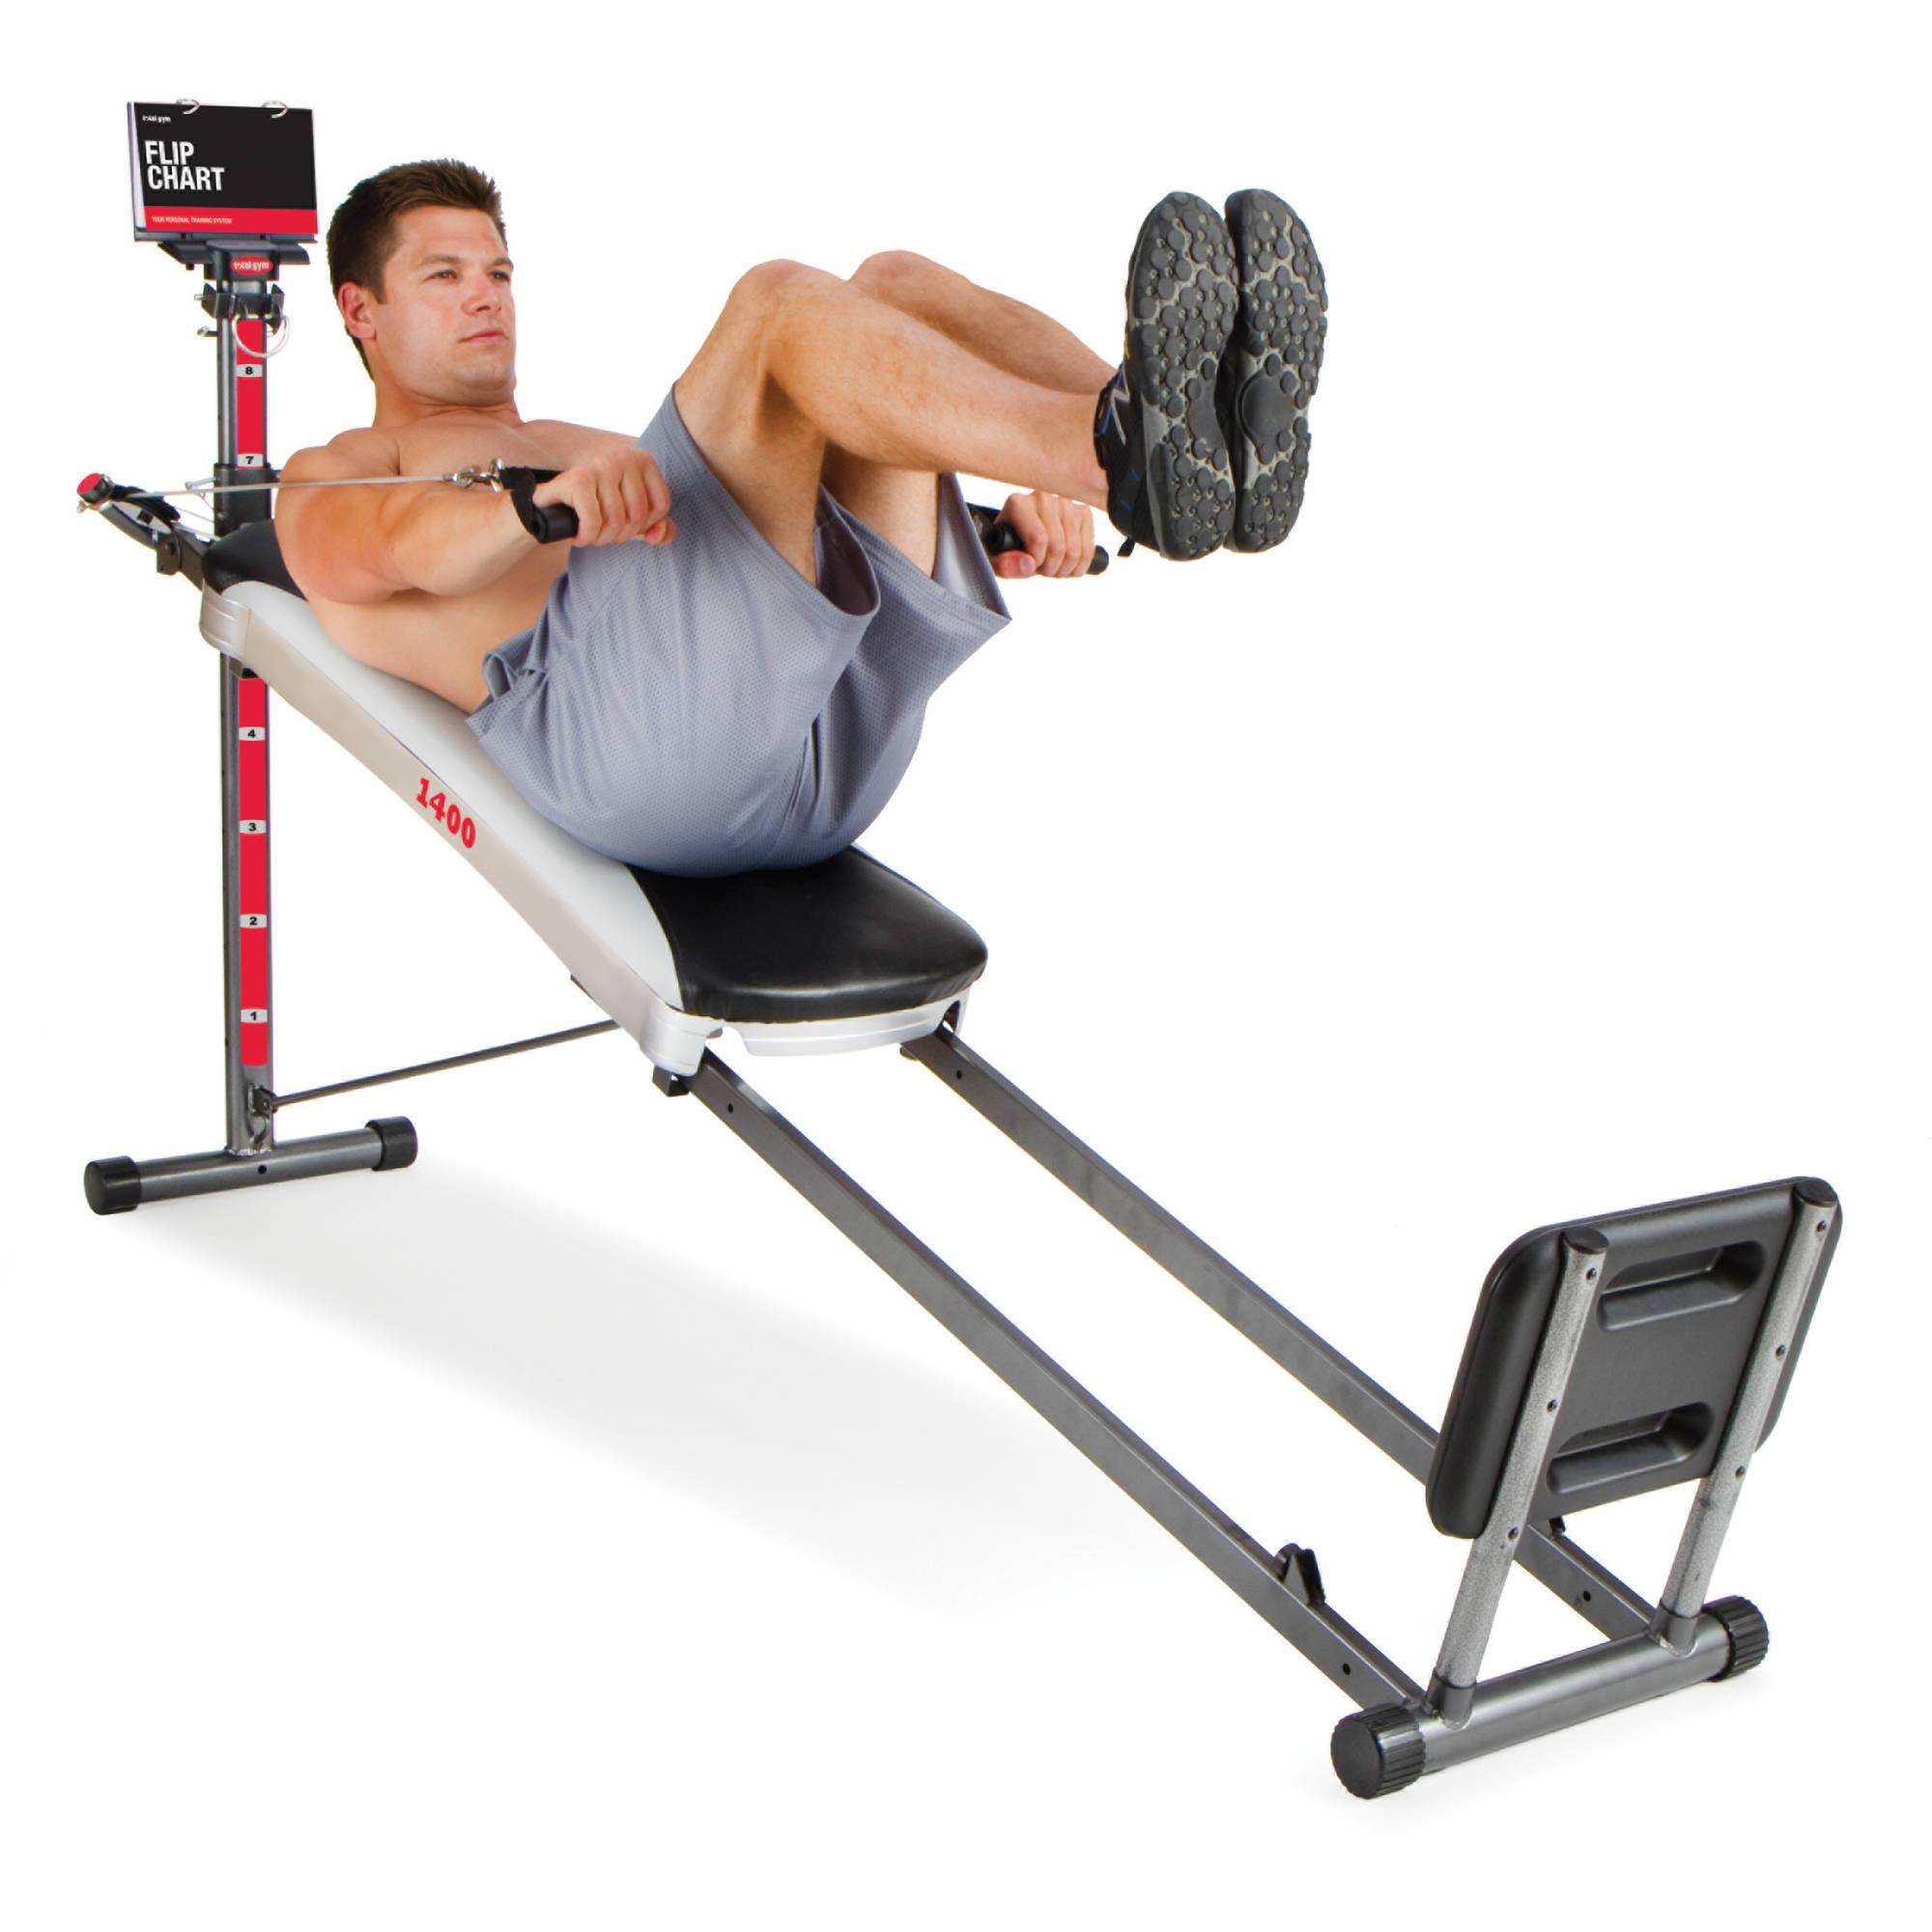 Total Gym 1400 Deluxe Home Fitness Exercise Machine Equipment with Workout DVD - image 10 of 15